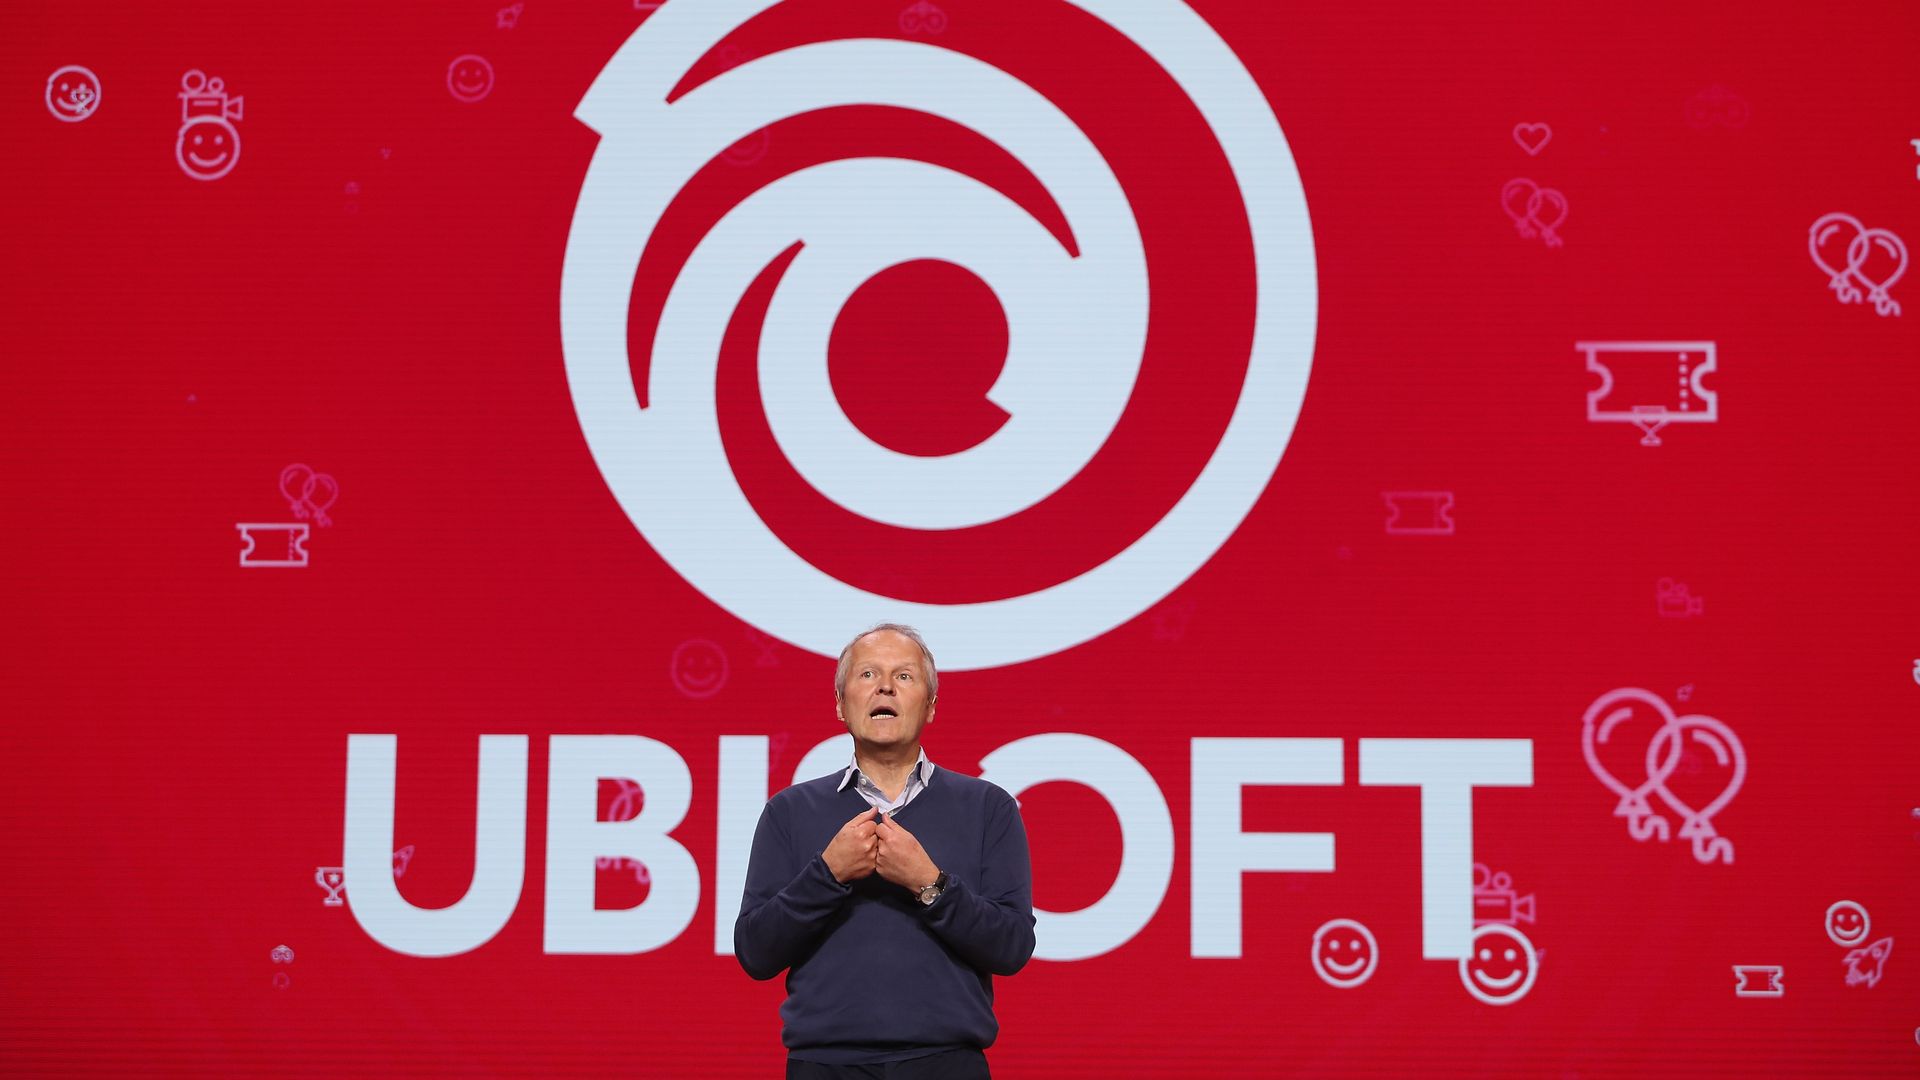 Ubisoft CEO Yves Guillemot in front of the company's logo.